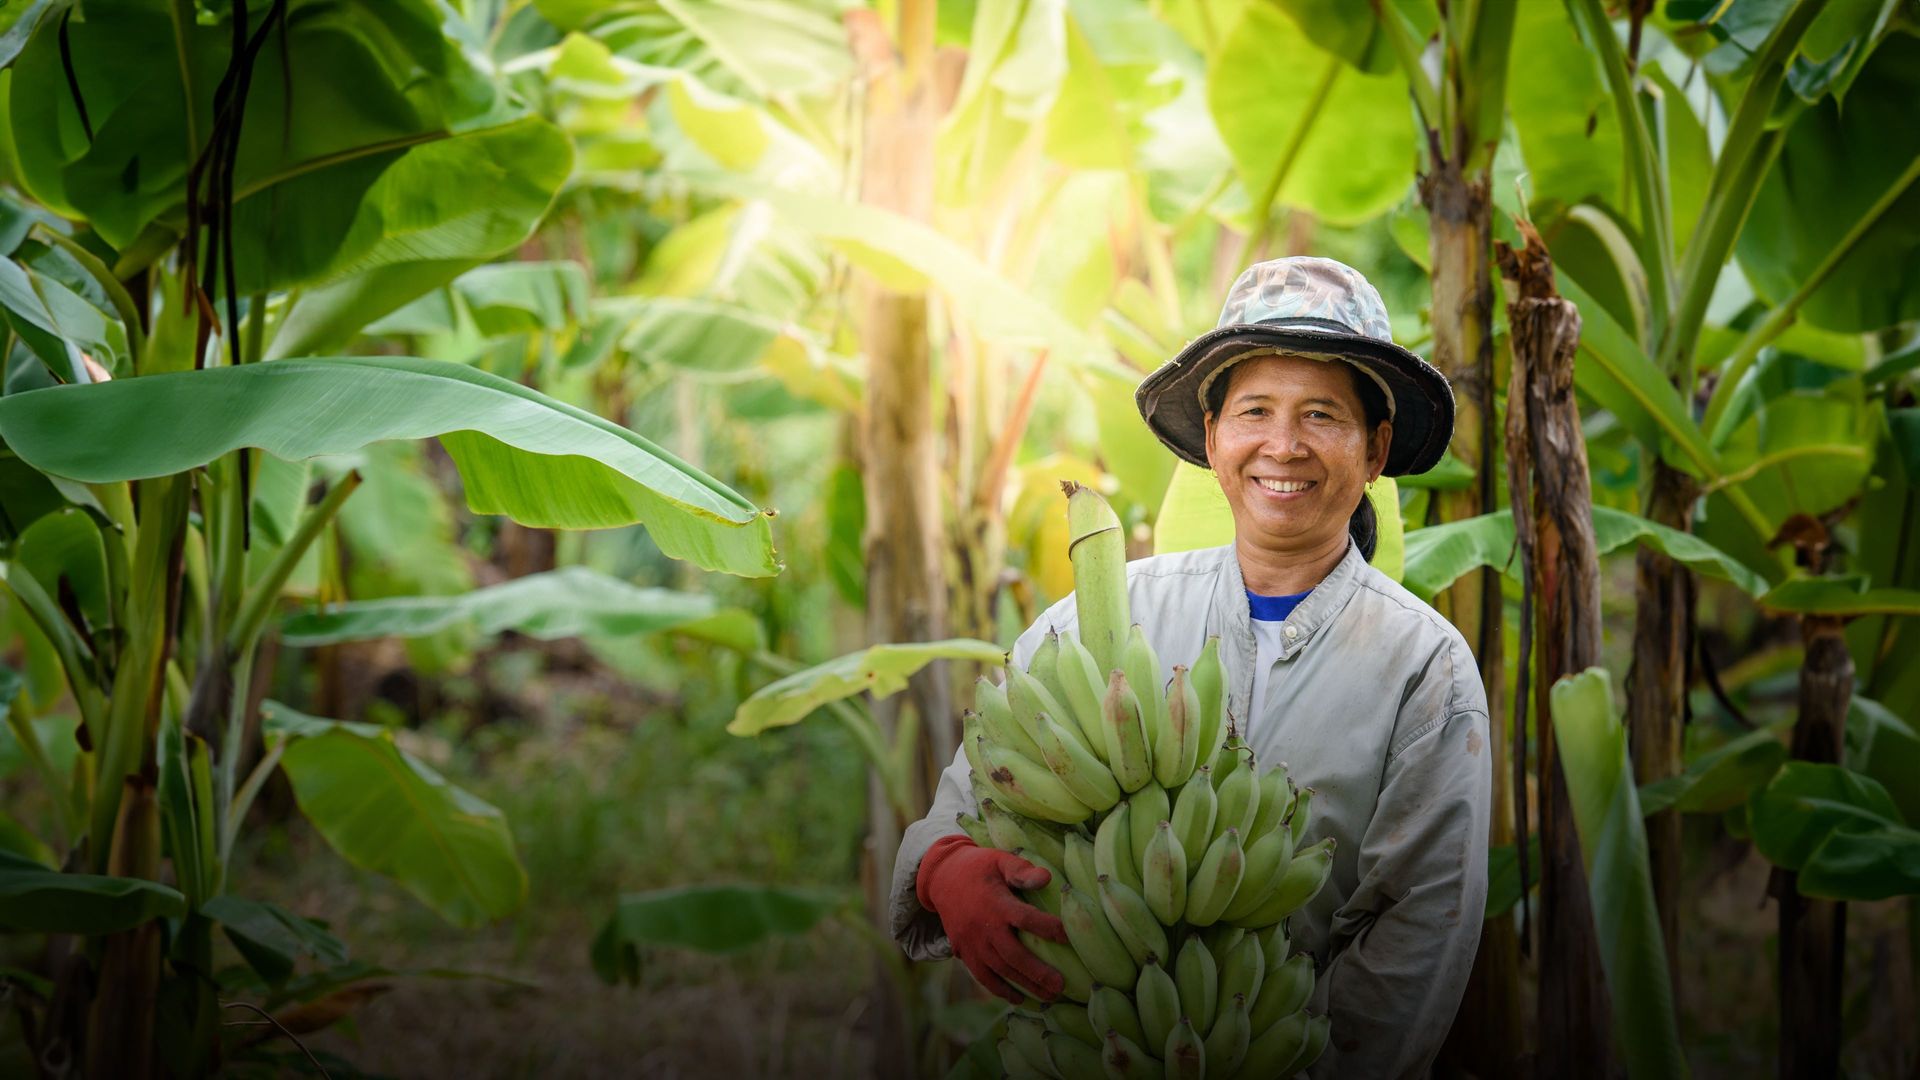 Image of a banana producer holding a crop after harvest 